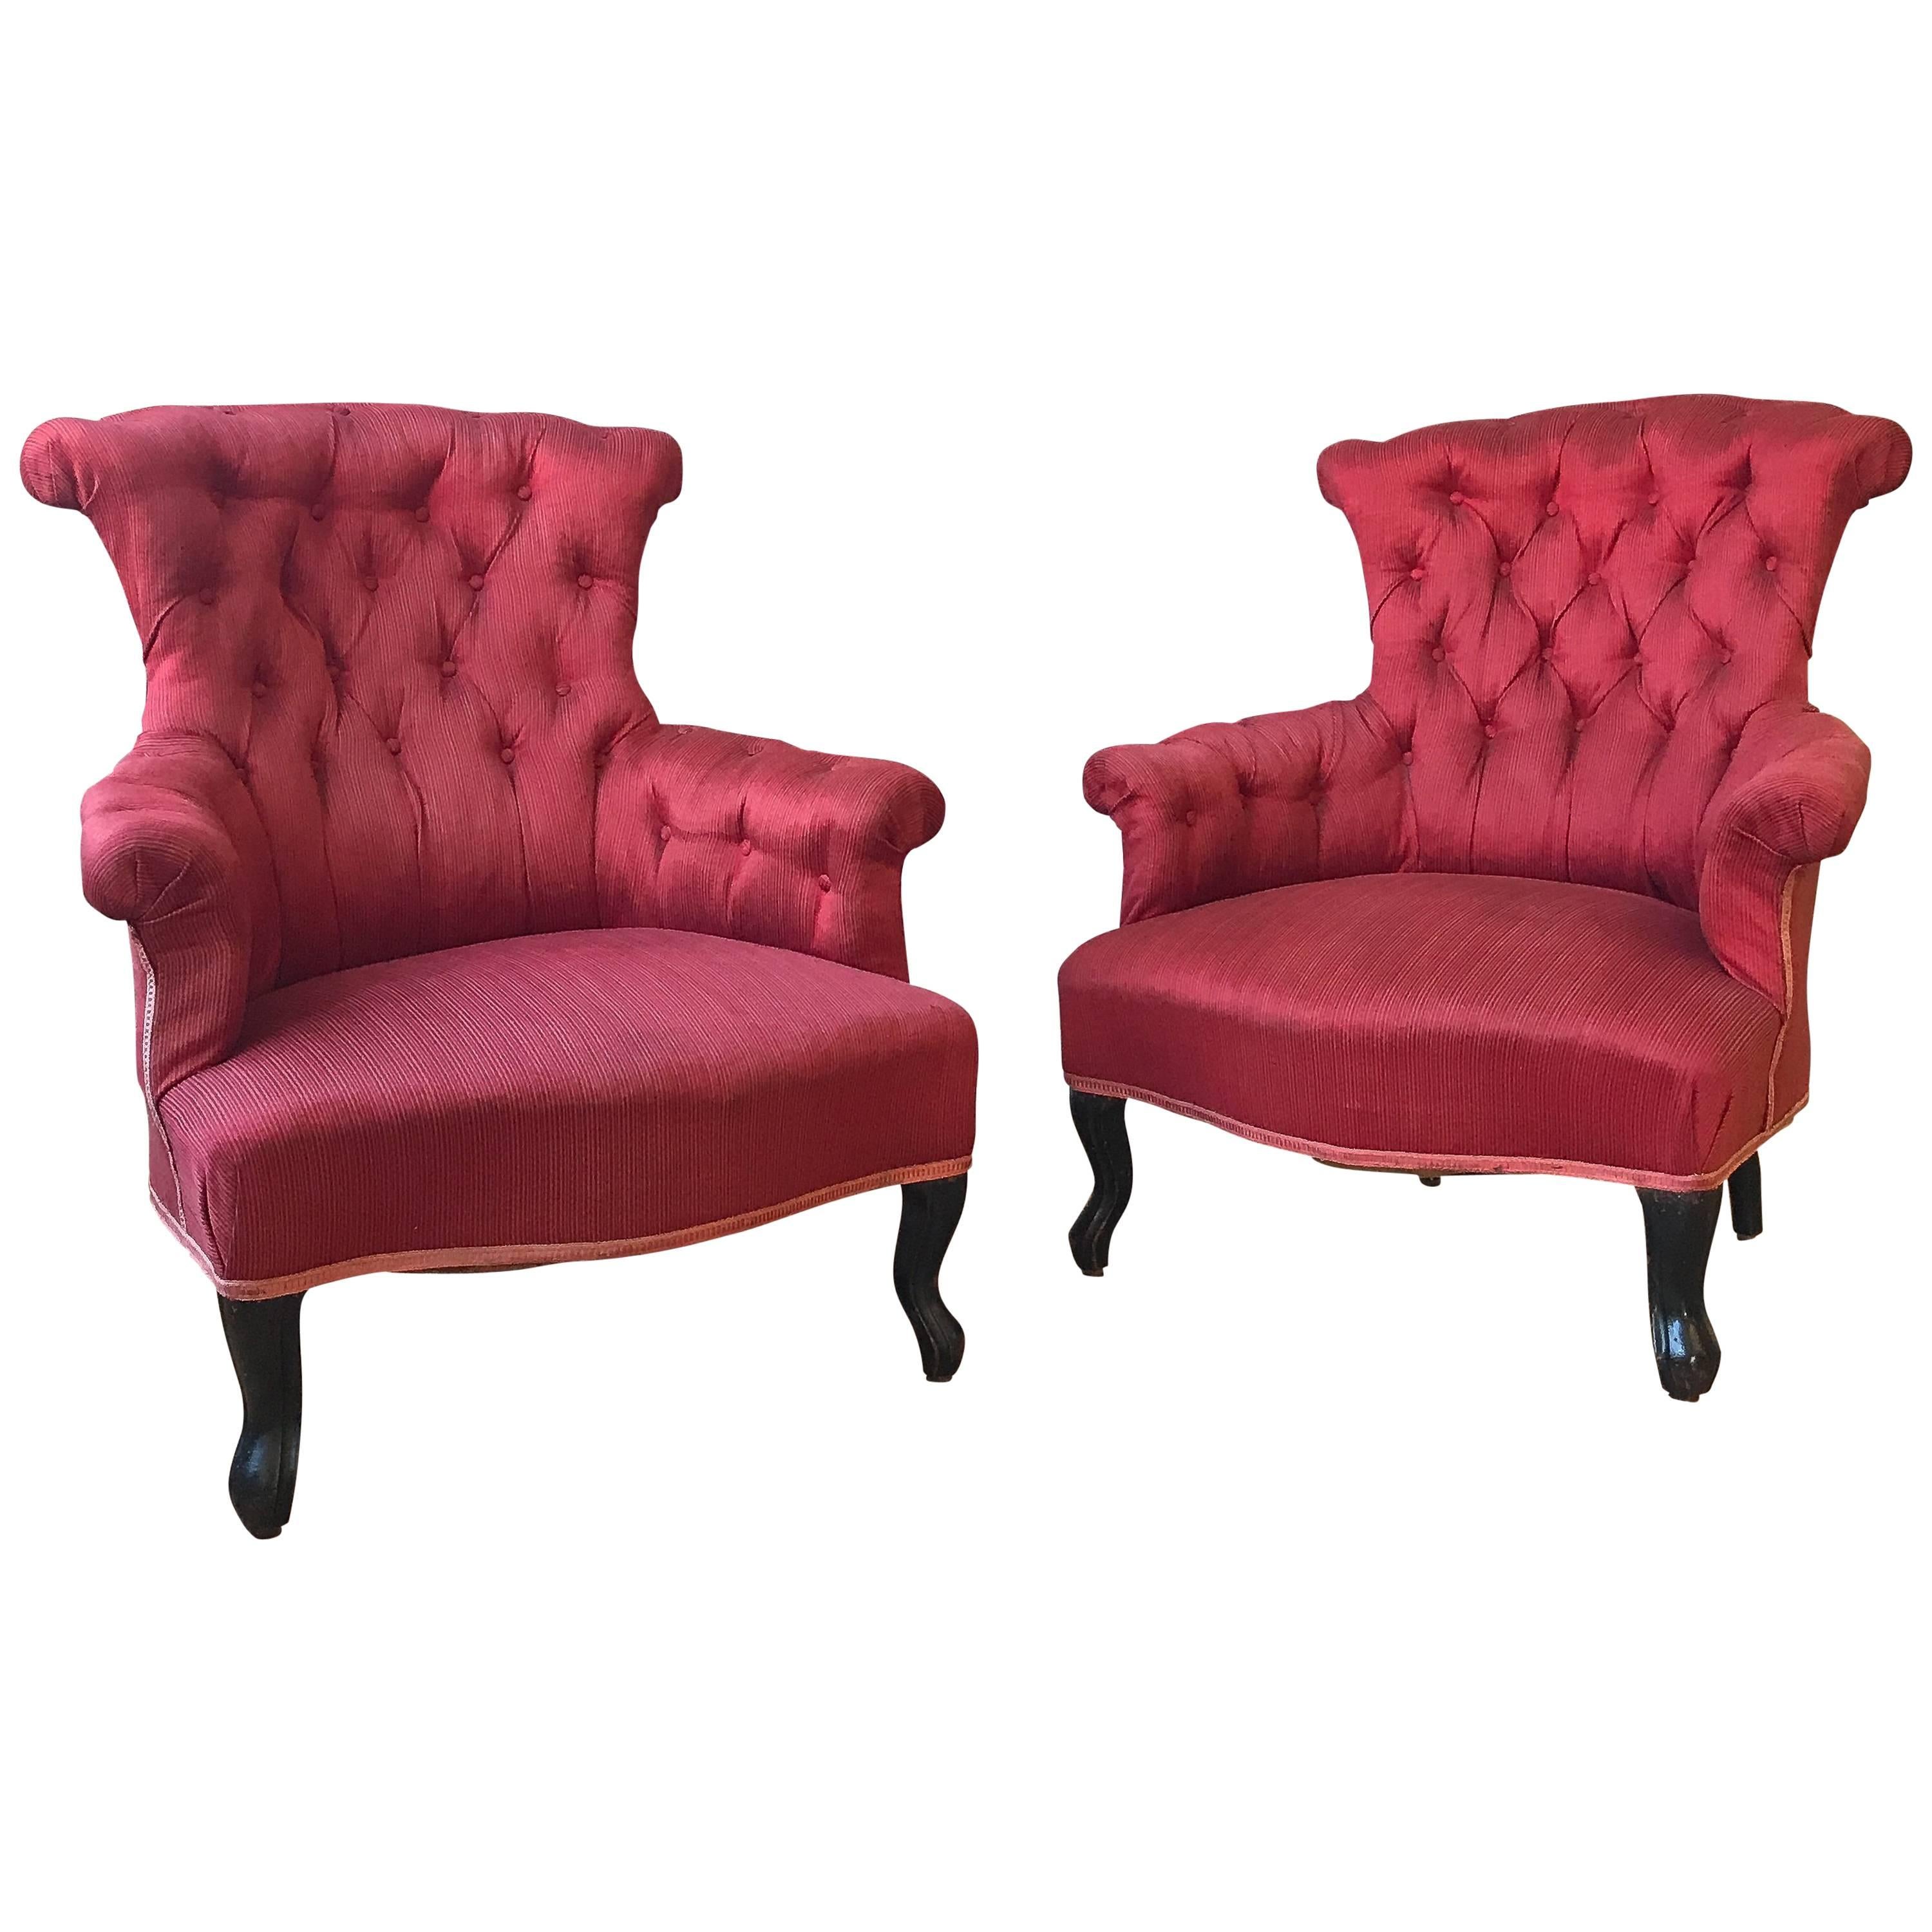 Pair of French Upholstered Armchairs in Red Fabric For Sale